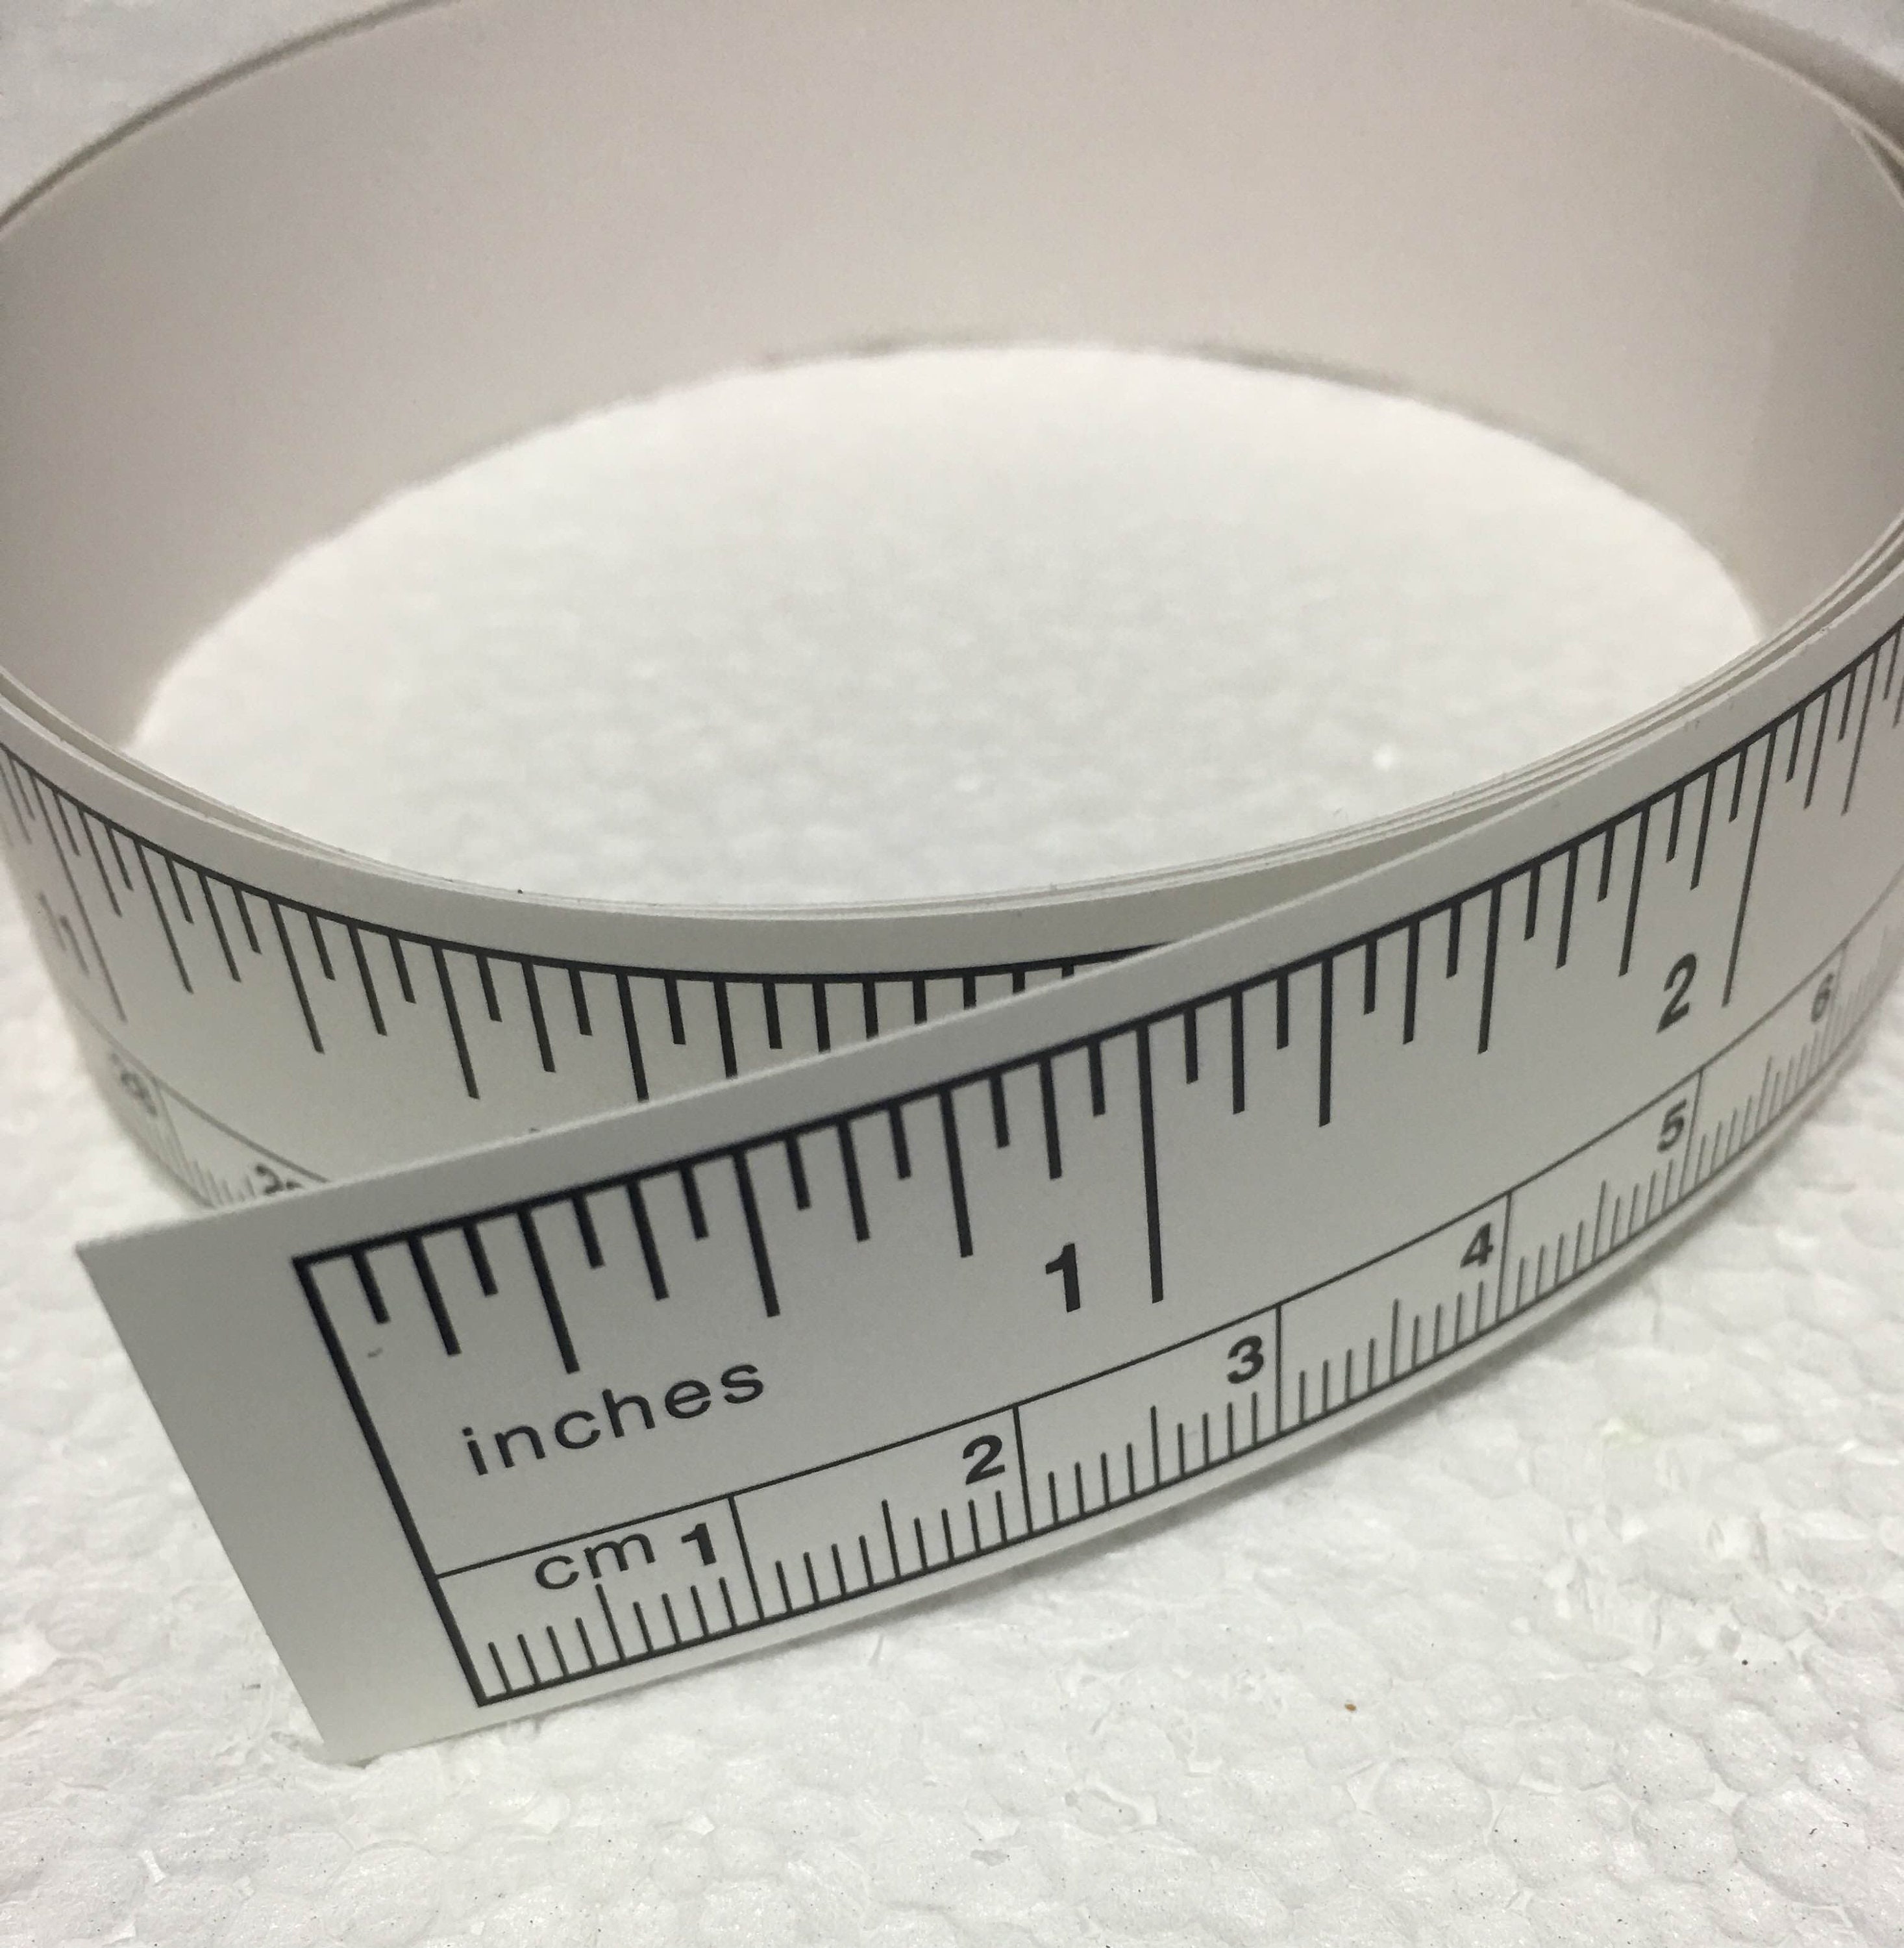 Soft Tape Measure Body Measuring Tape Cloth Ruler-Sewing R5X7 